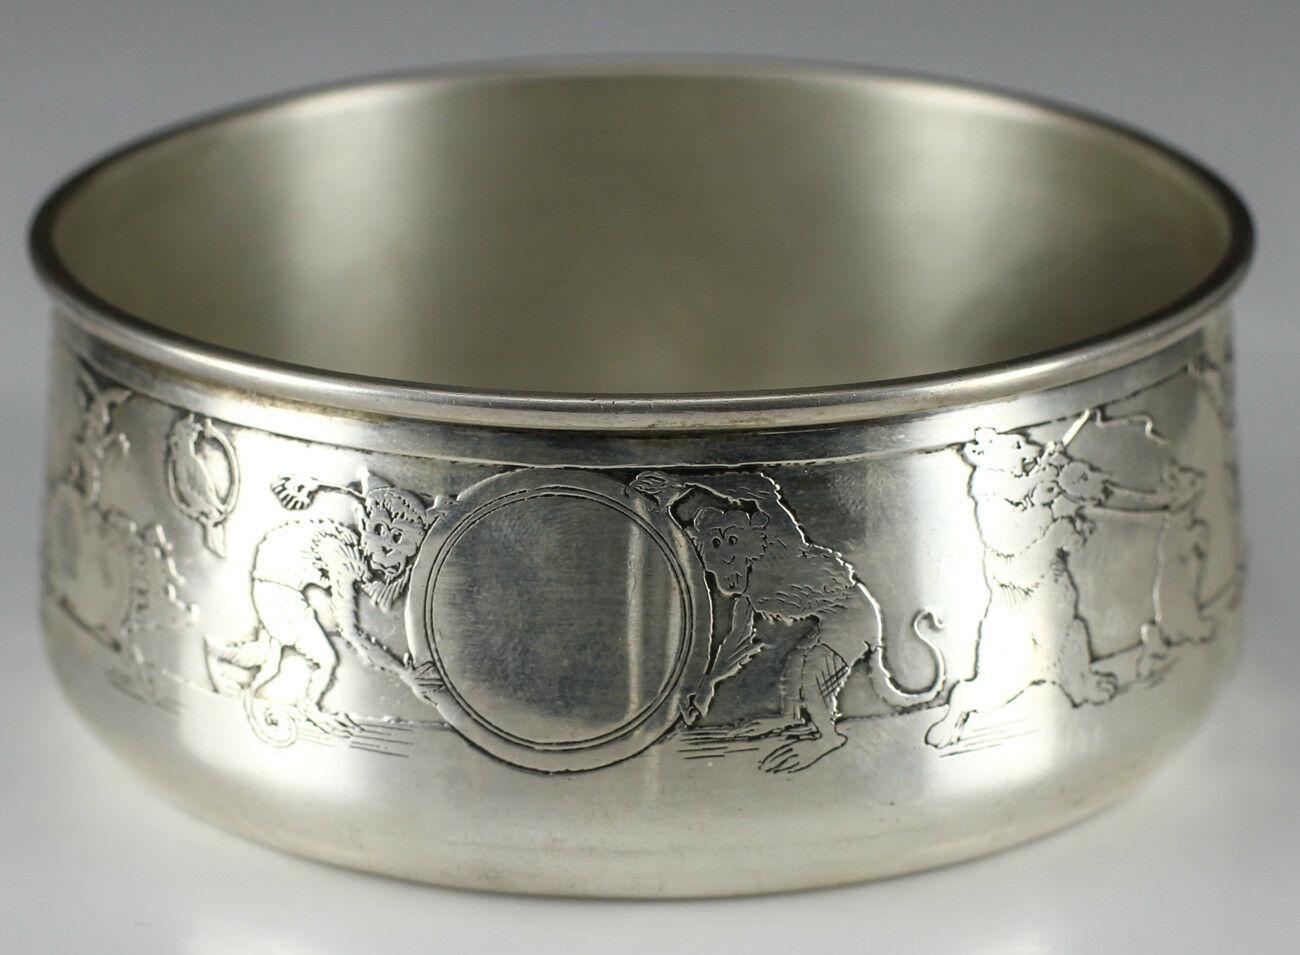 20th Century J.E. Caldwell & Co. Sterling Silver Child's Bowl w/ Saucer Circus Animals, 1950s